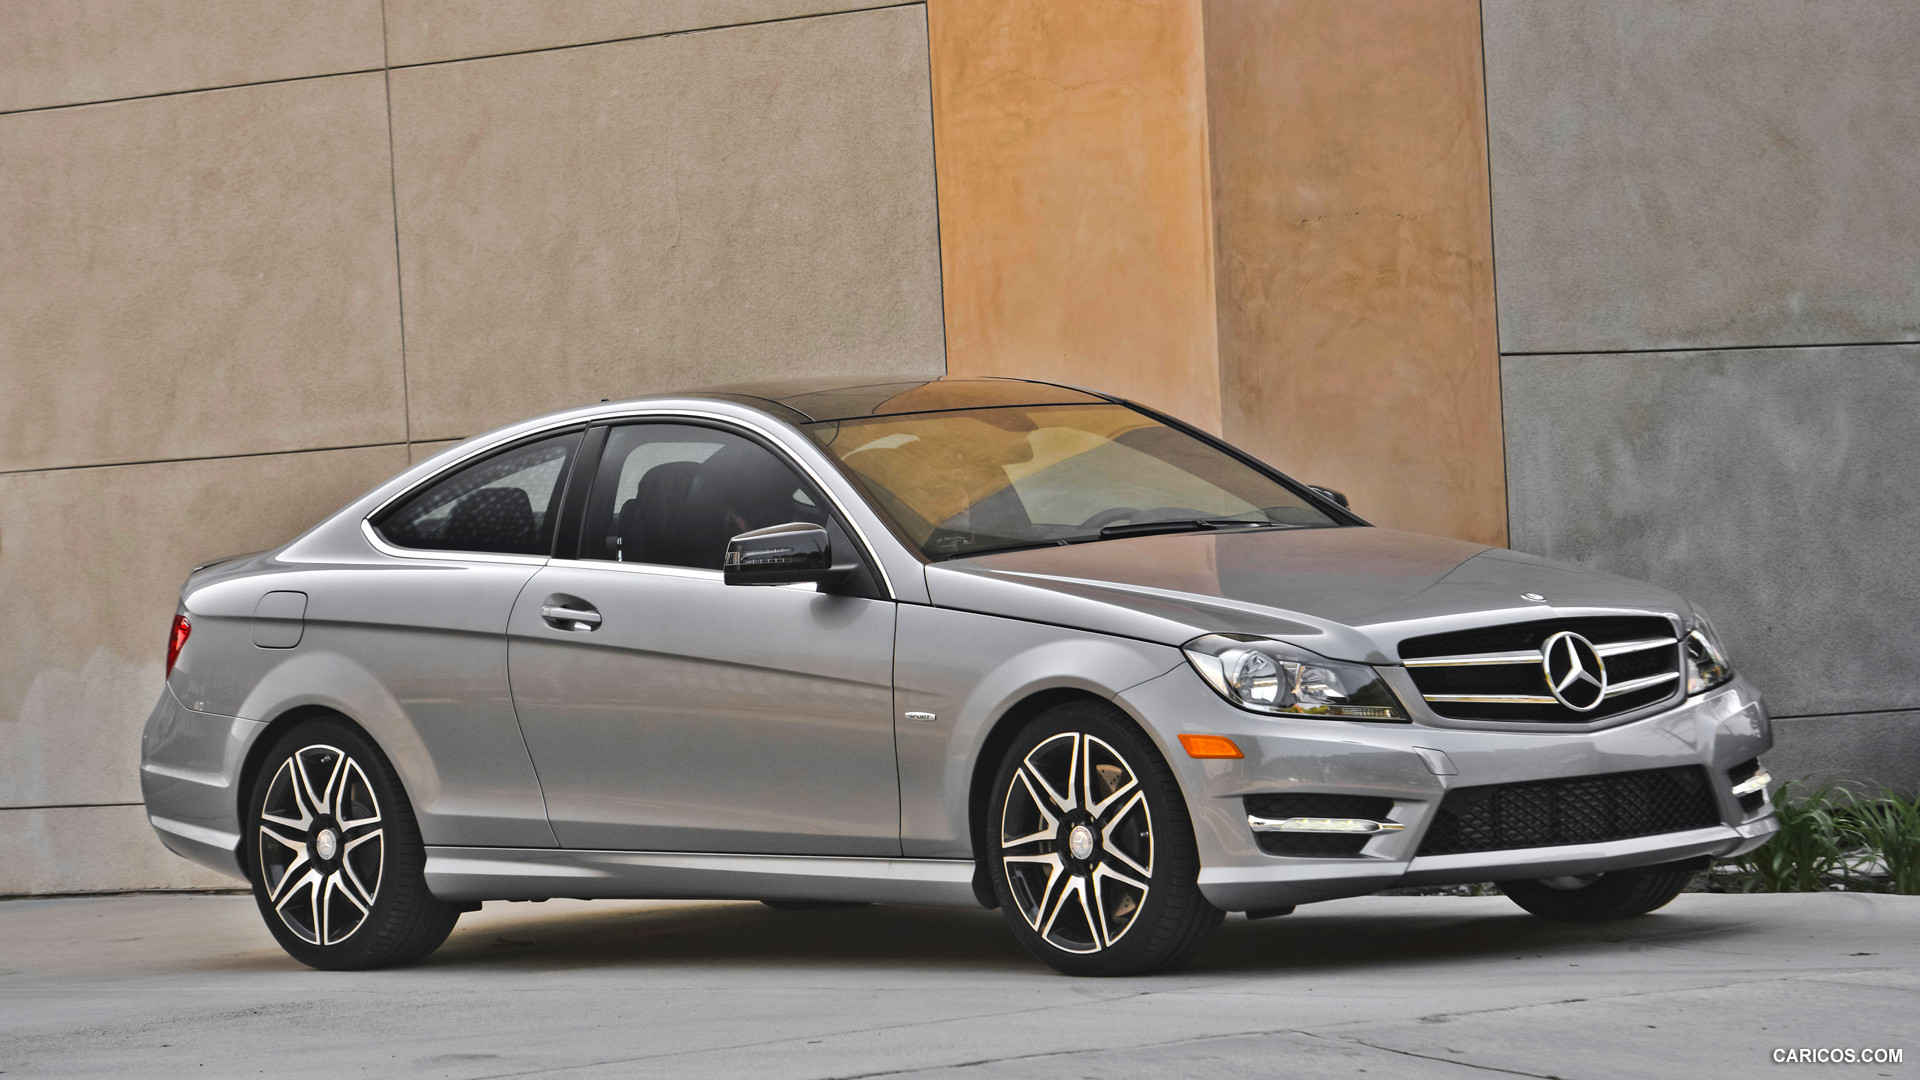 Mercedes-Benz C250 Coupe (2013)  - Front, #66 of 86